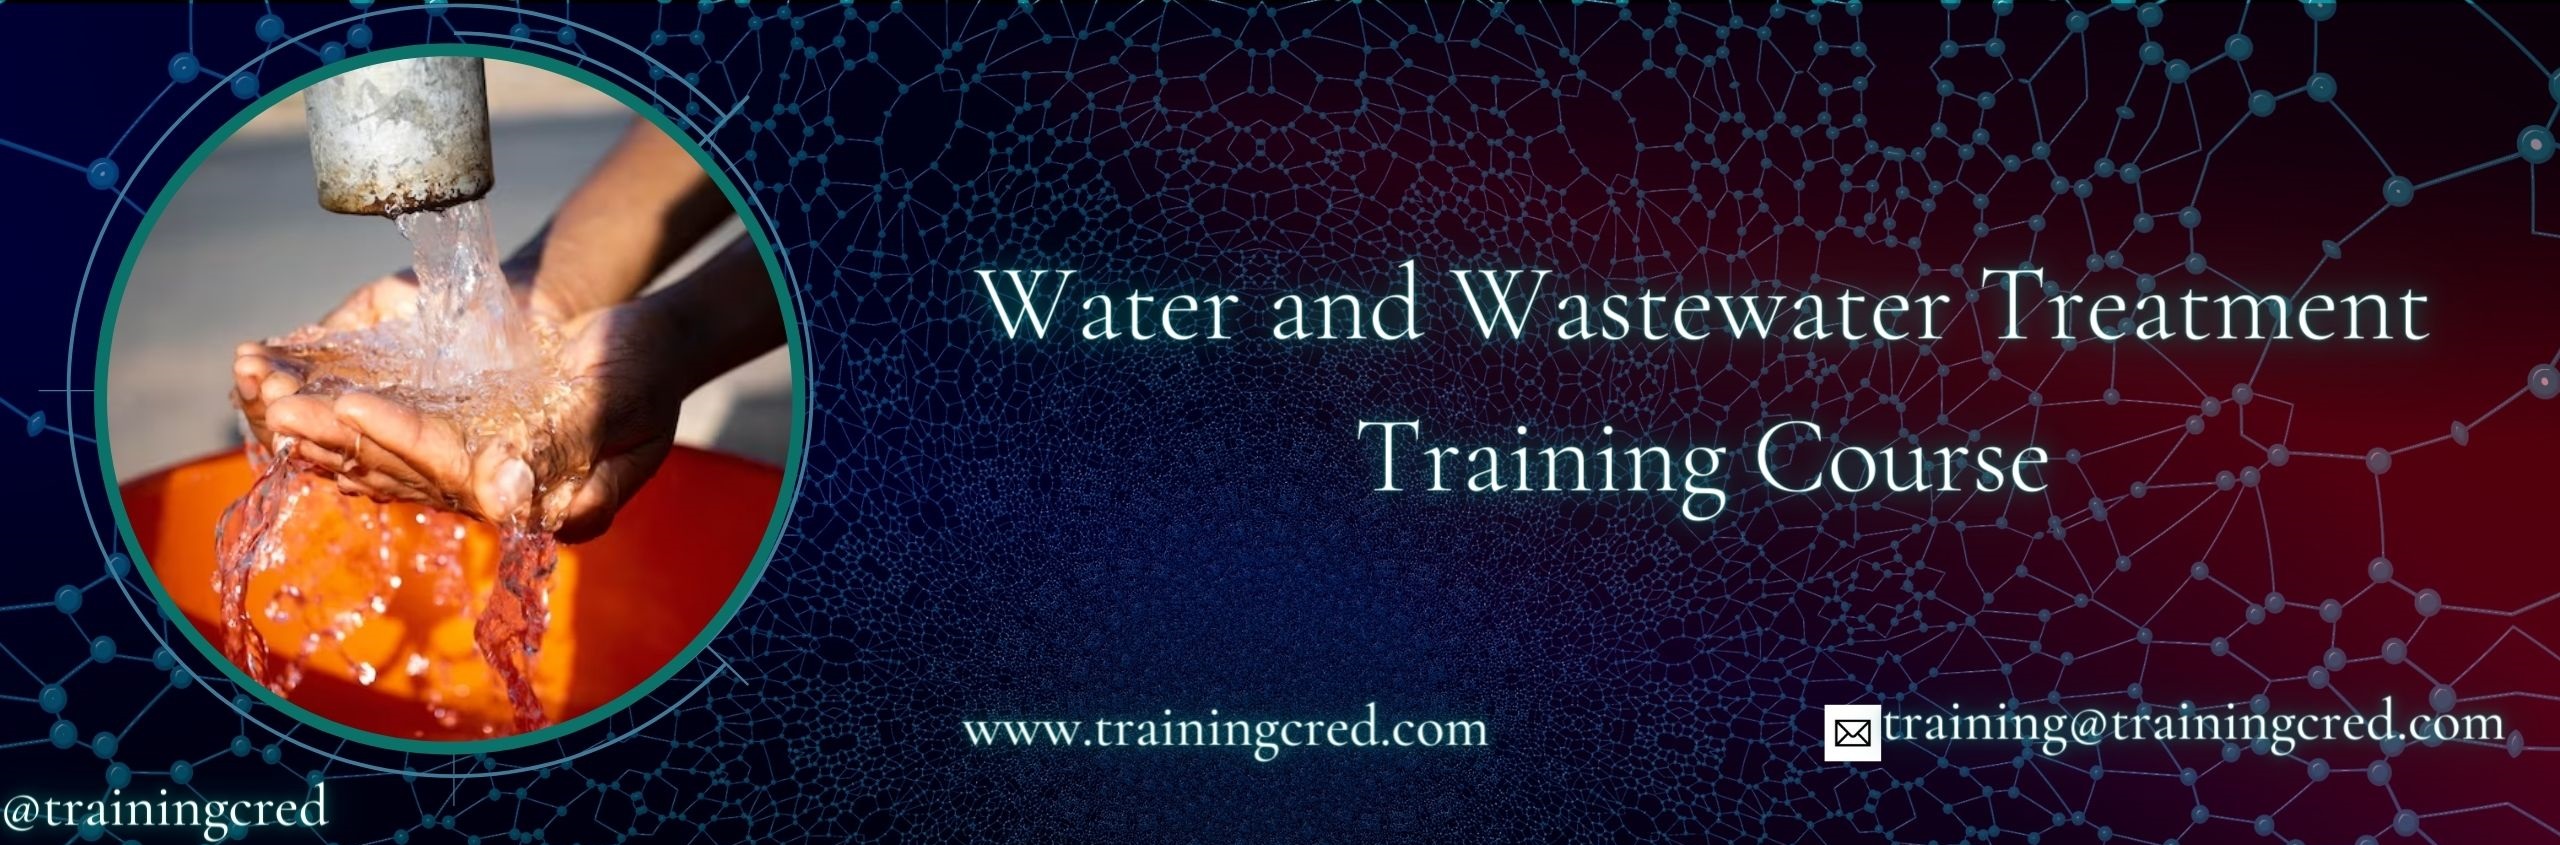 Water and Wastewater Treatment Training